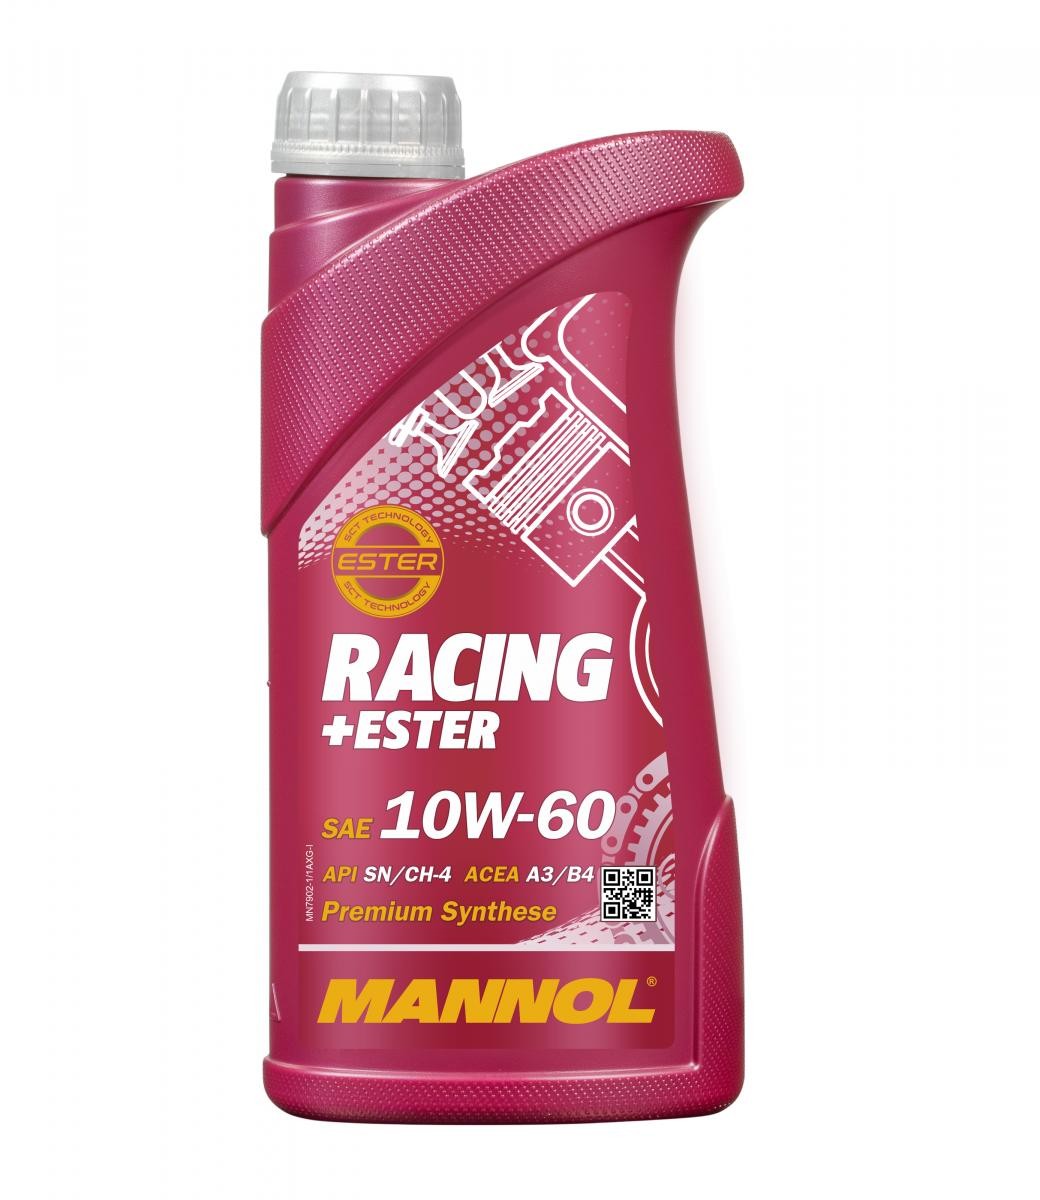 MANNOL RACING+ESTER MN7902-1 Engine oil 10W-60, 1l, Synthetic Oil